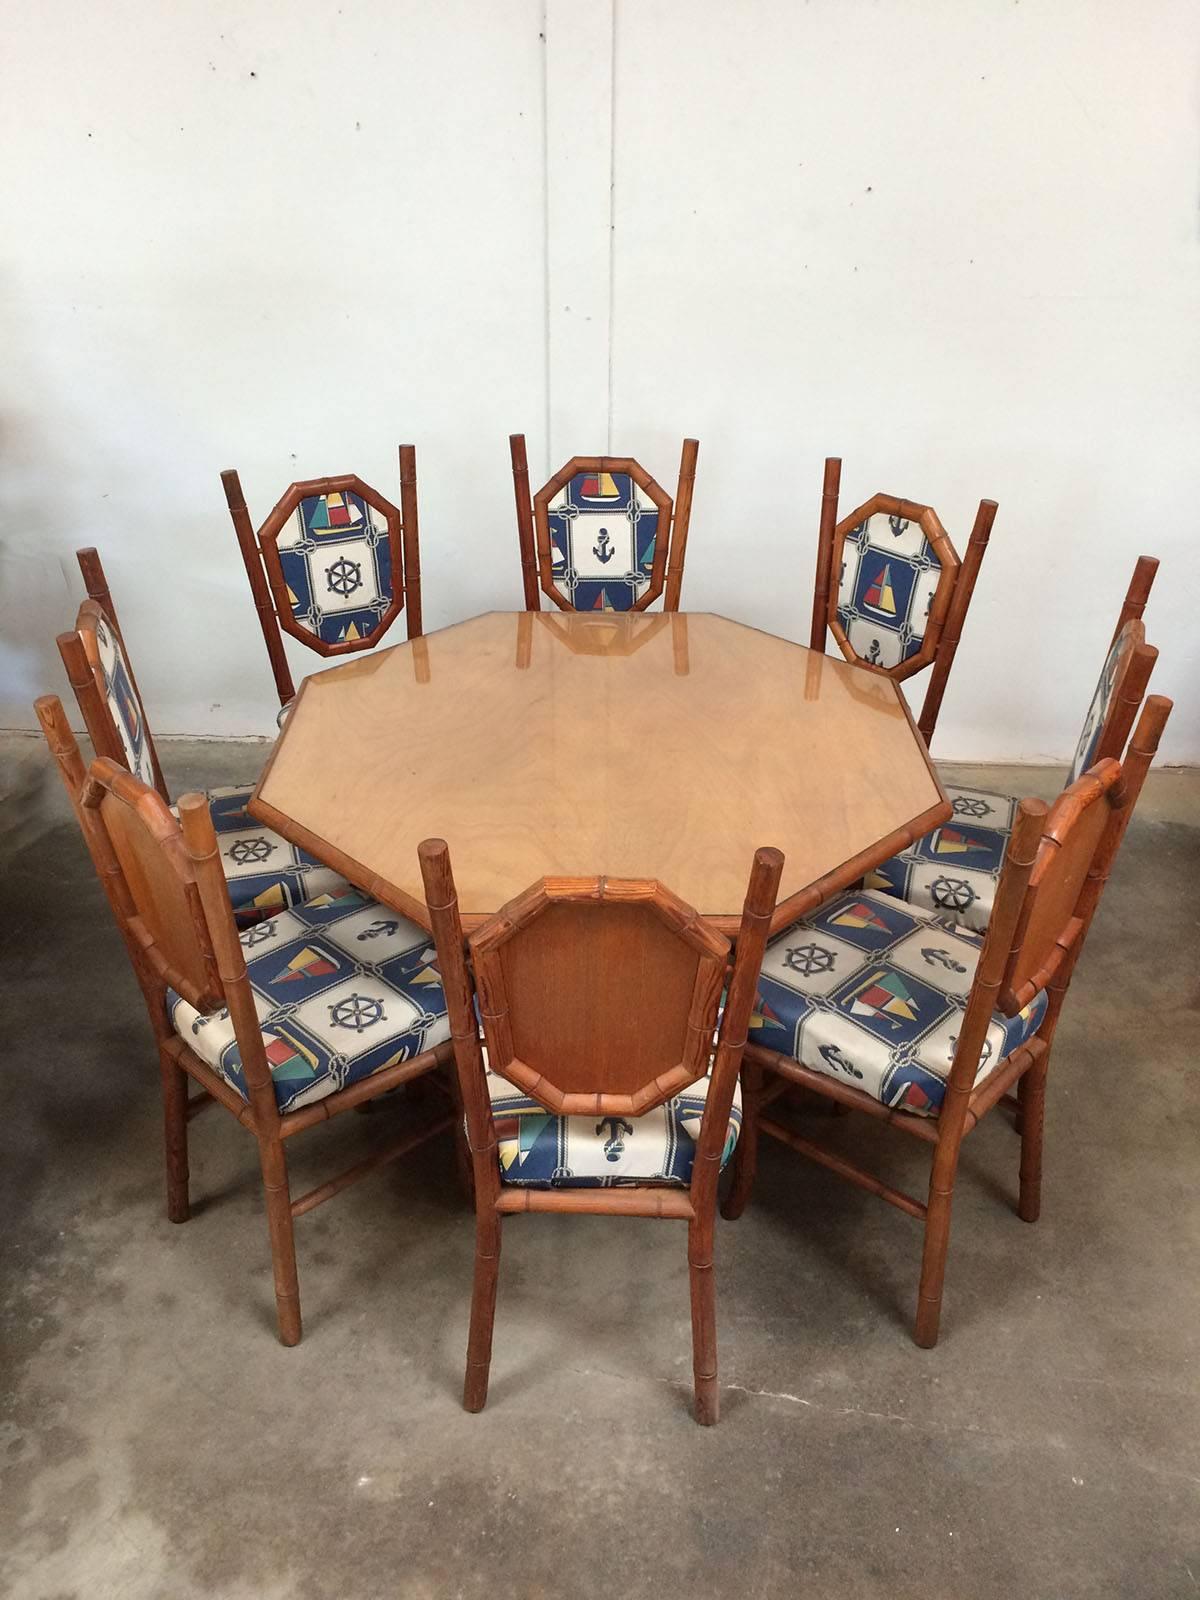 Card table and six chairs in red wood and nautically themed fabric. Wood has been turned to imitate bamboo and the octagonal table is surfaced in laminated plywood and then glass for protection.